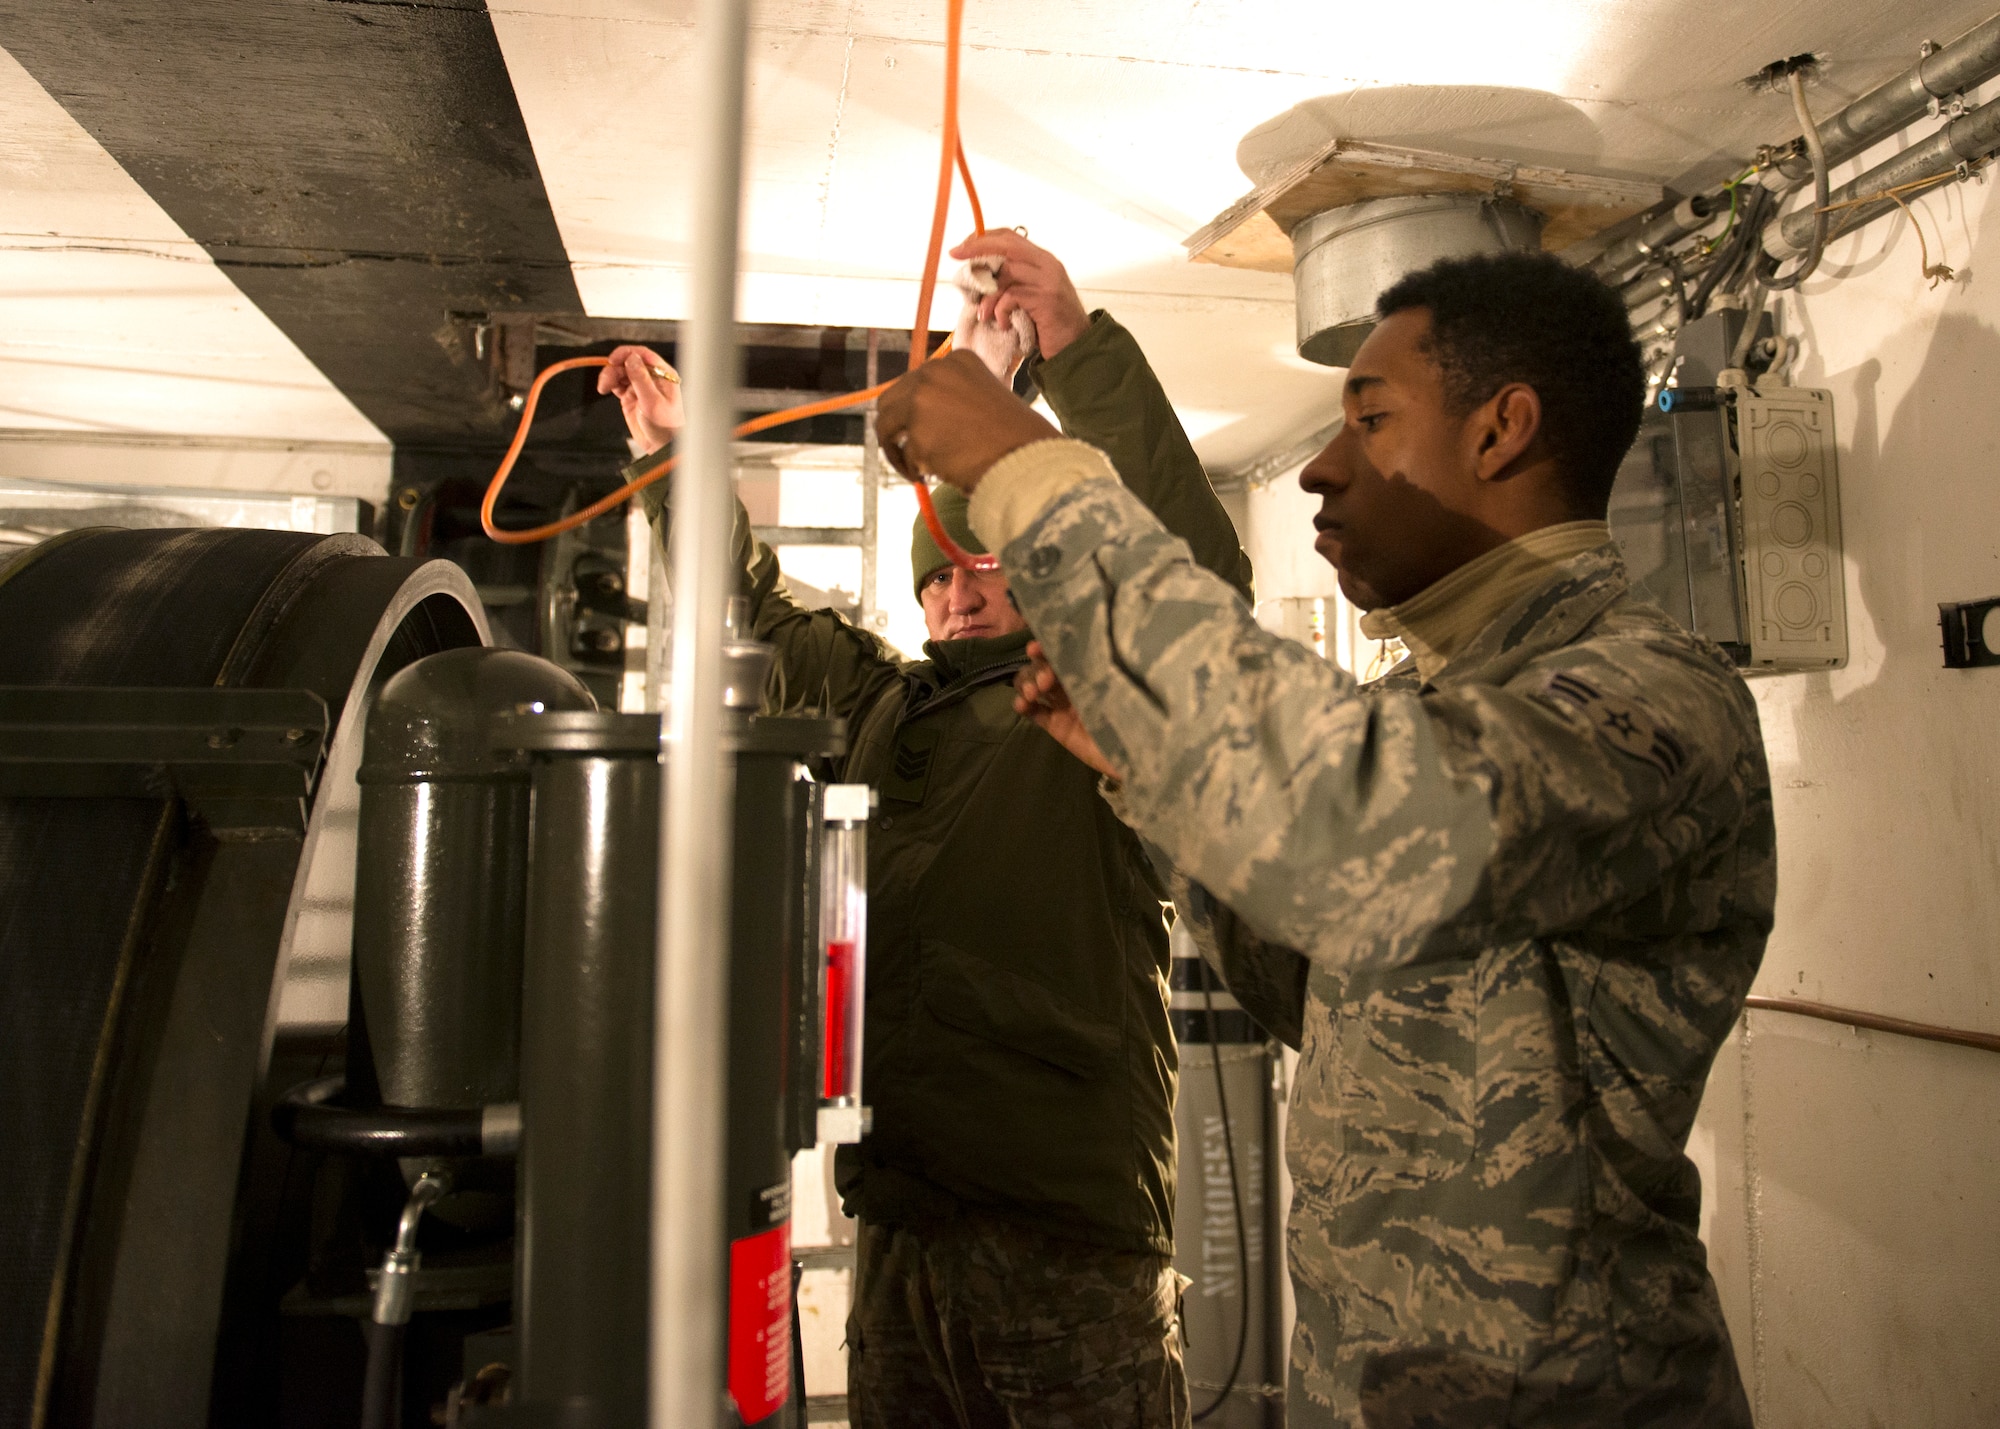 U.S. Air Force Airman 1st Class Marquis Brown, 786th Civil Engineer Squadron power production technician, works with Lithuania air force Pvt. 3rd Class Aurimas Kantauskas, aircraft arresting system technician, on an aircraft arresting system engine at Ramstein Air Base, Germany, Nov. 7, 2019. The aircraft arresting system is a mechanism designed to stop airplanes in the event pilots cannot stop them on their own.